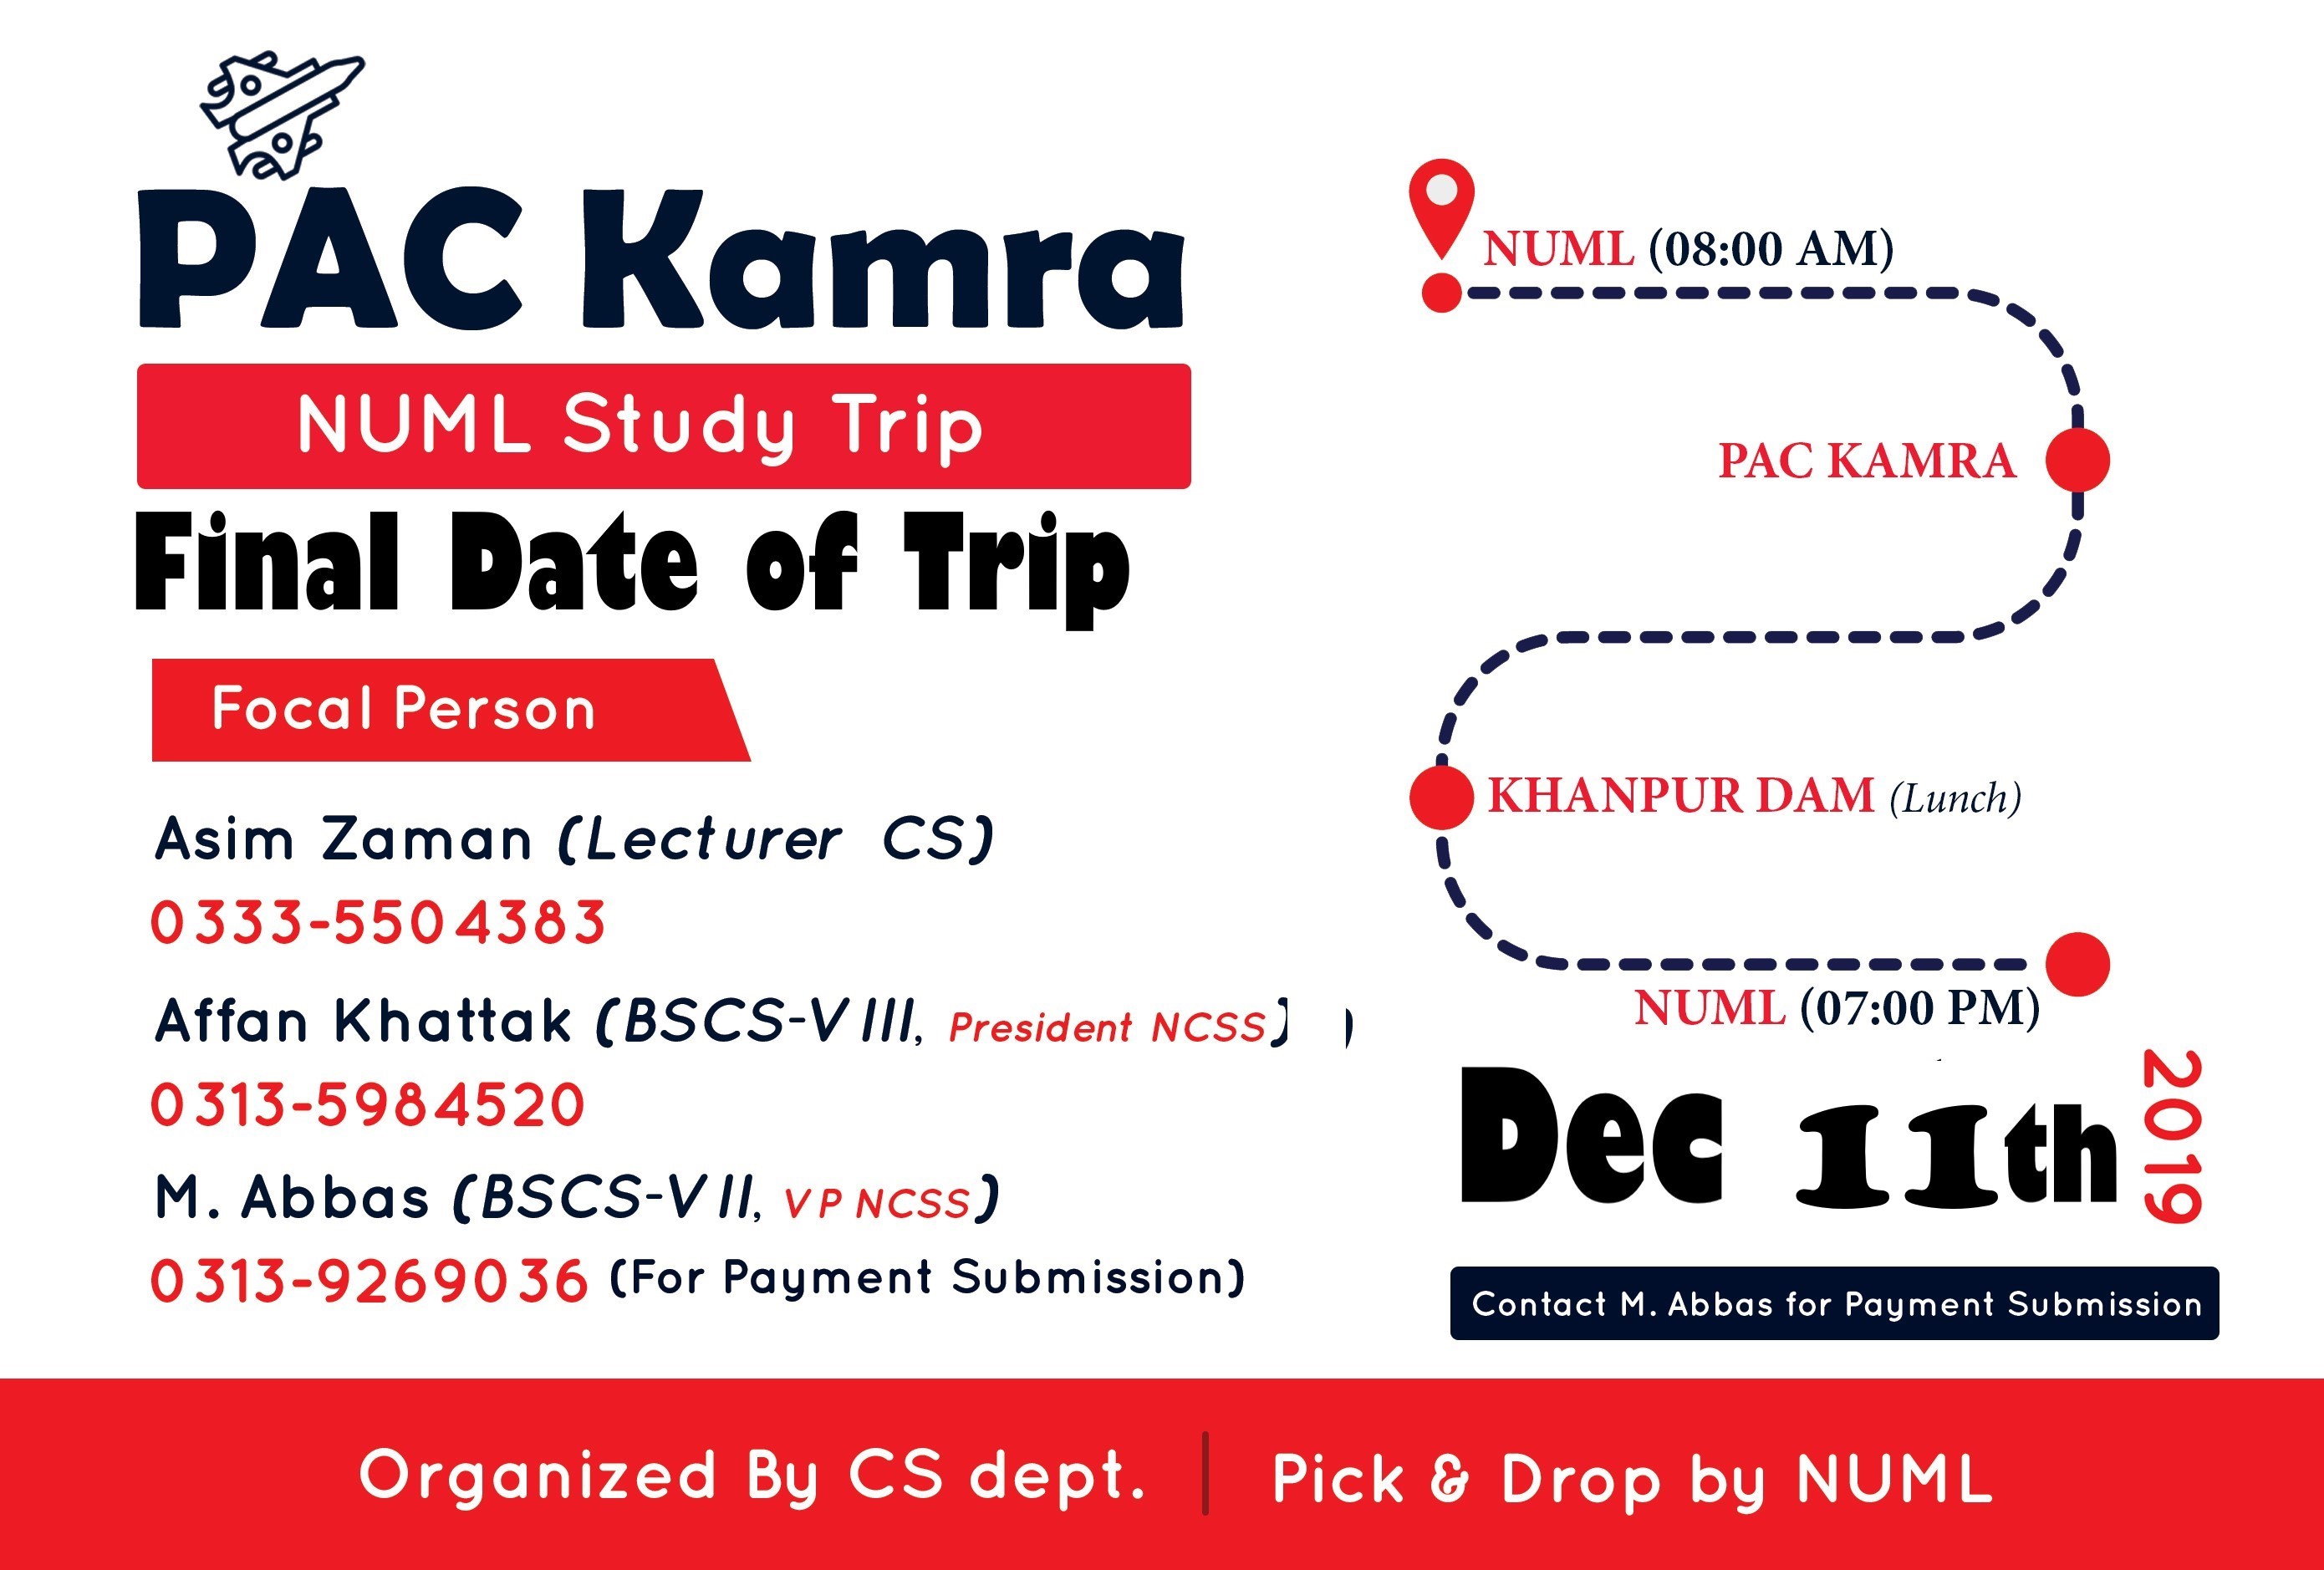 New Date for 'PAC Kamra' Trip Announced